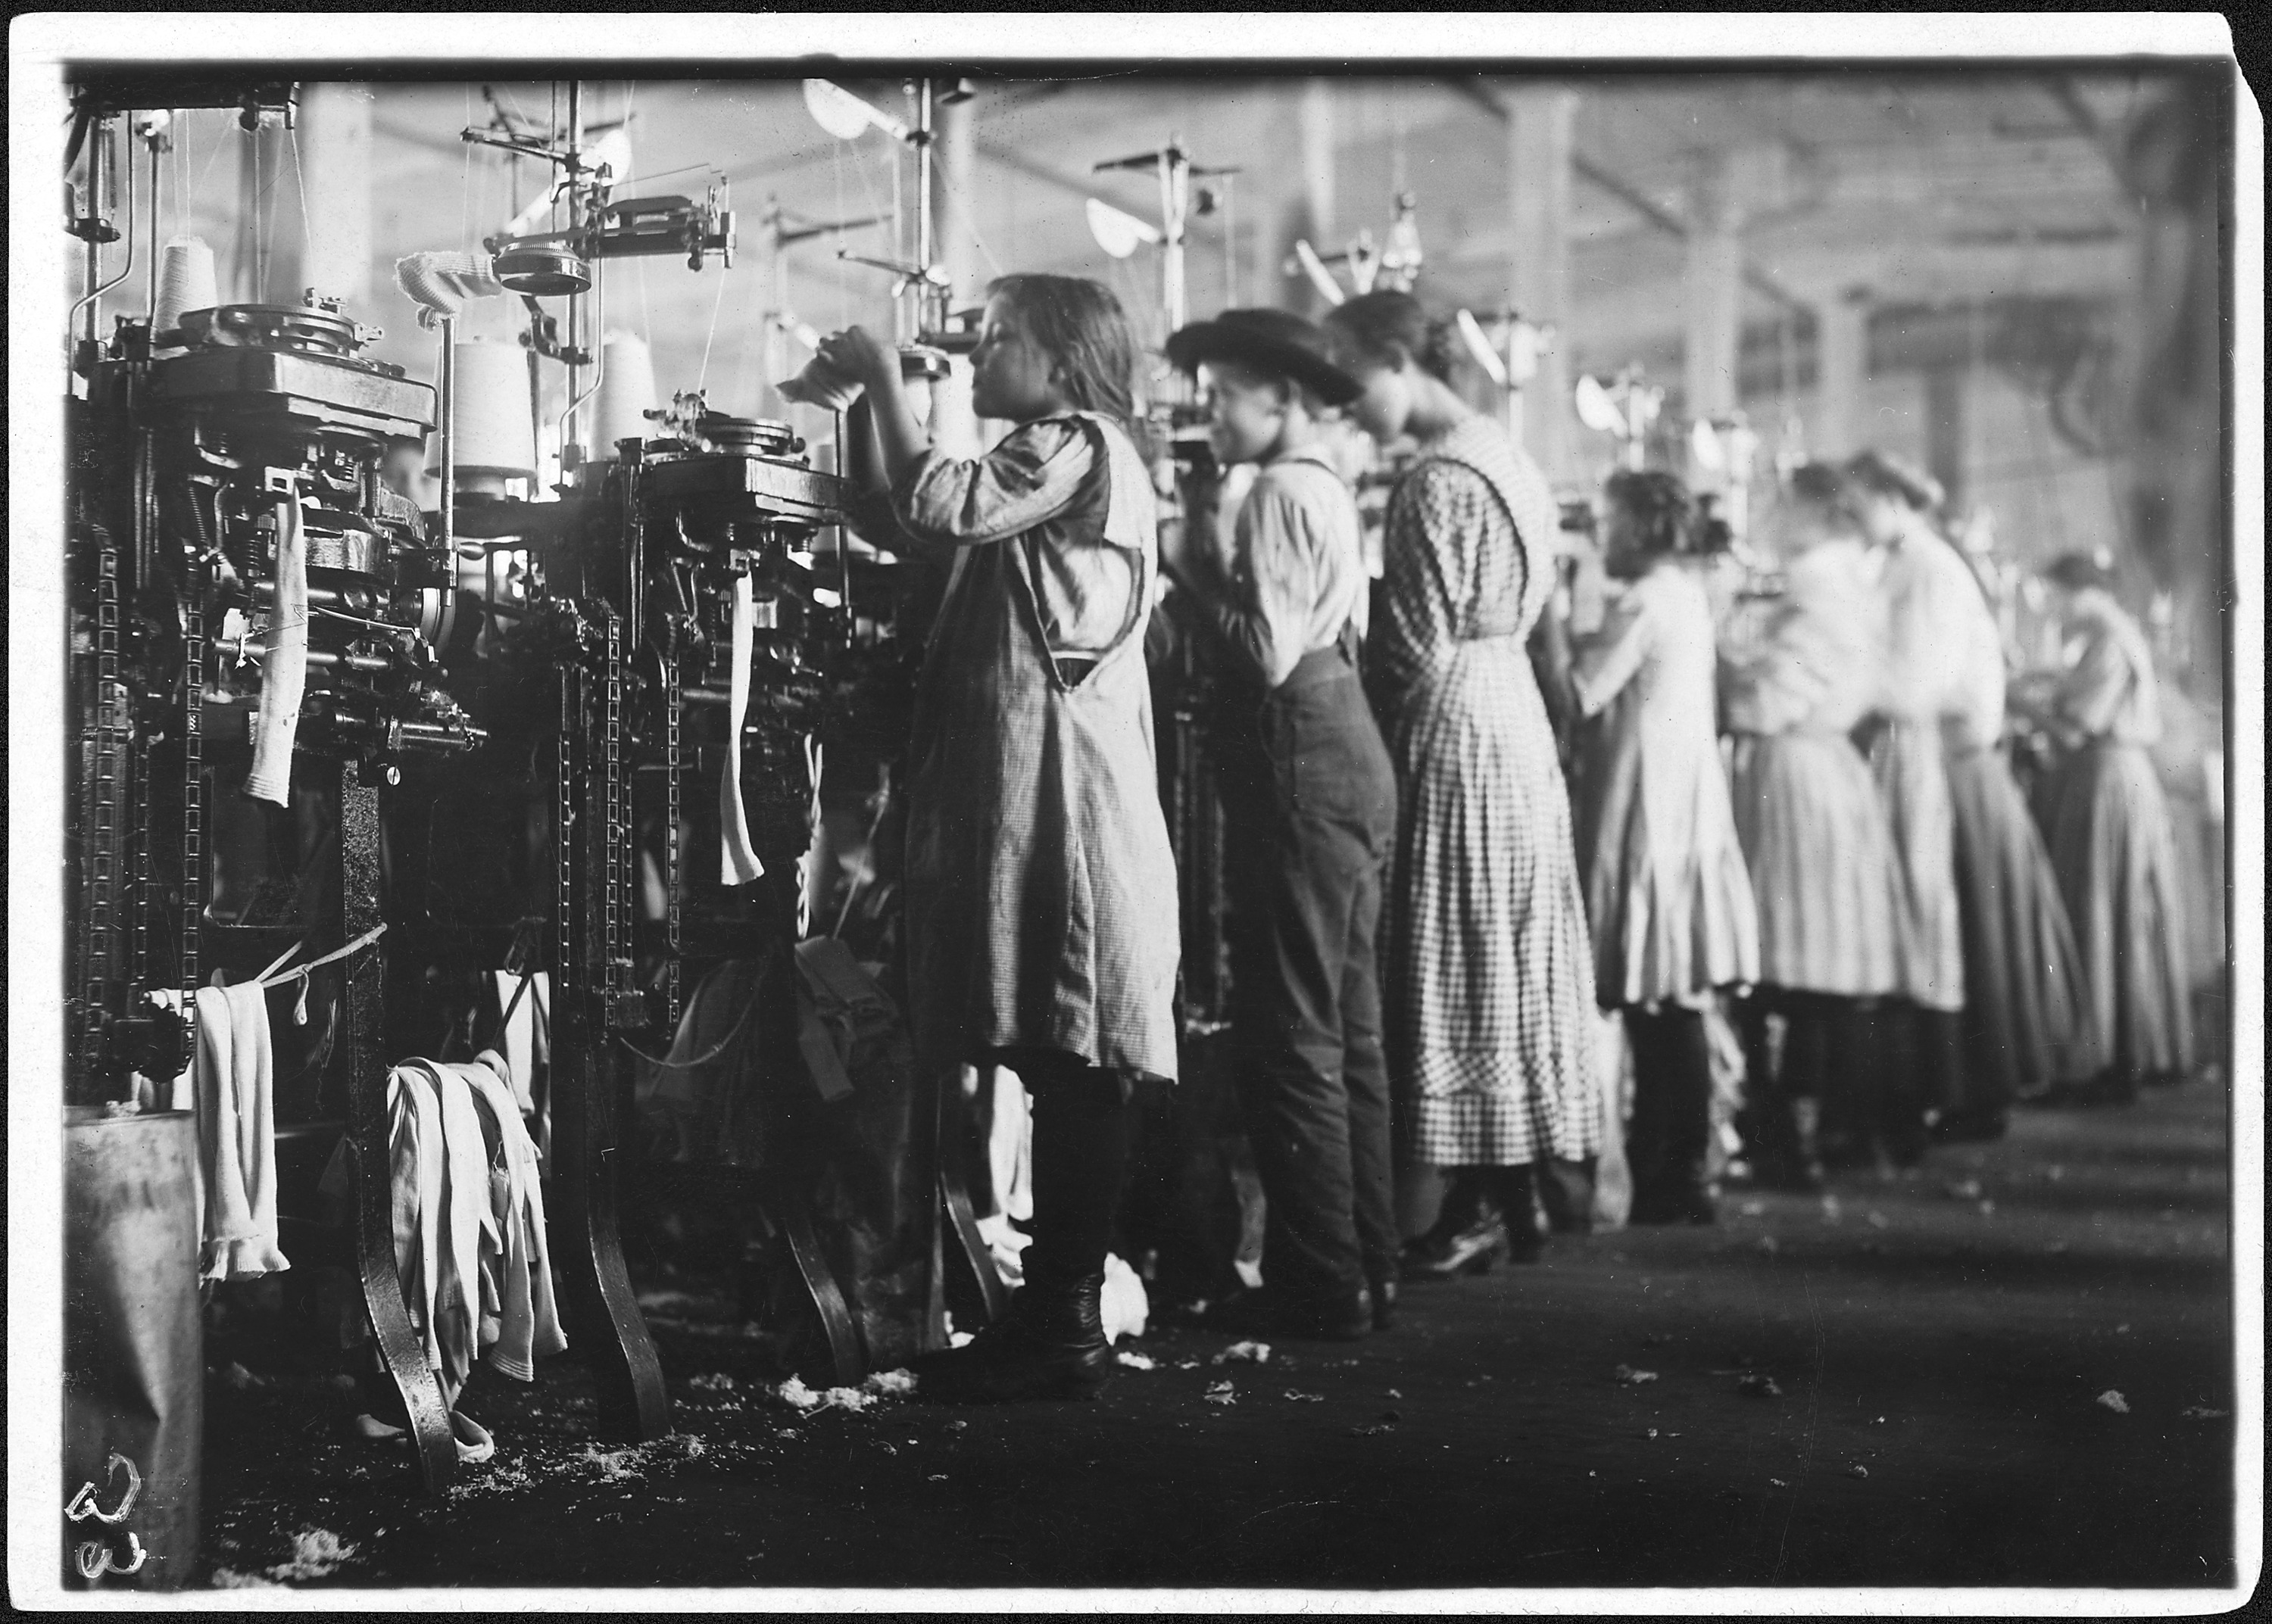 Some of the young knitters in London Hosiery Mills. Photo during work hours. London, Tenn. - NARA - 523369